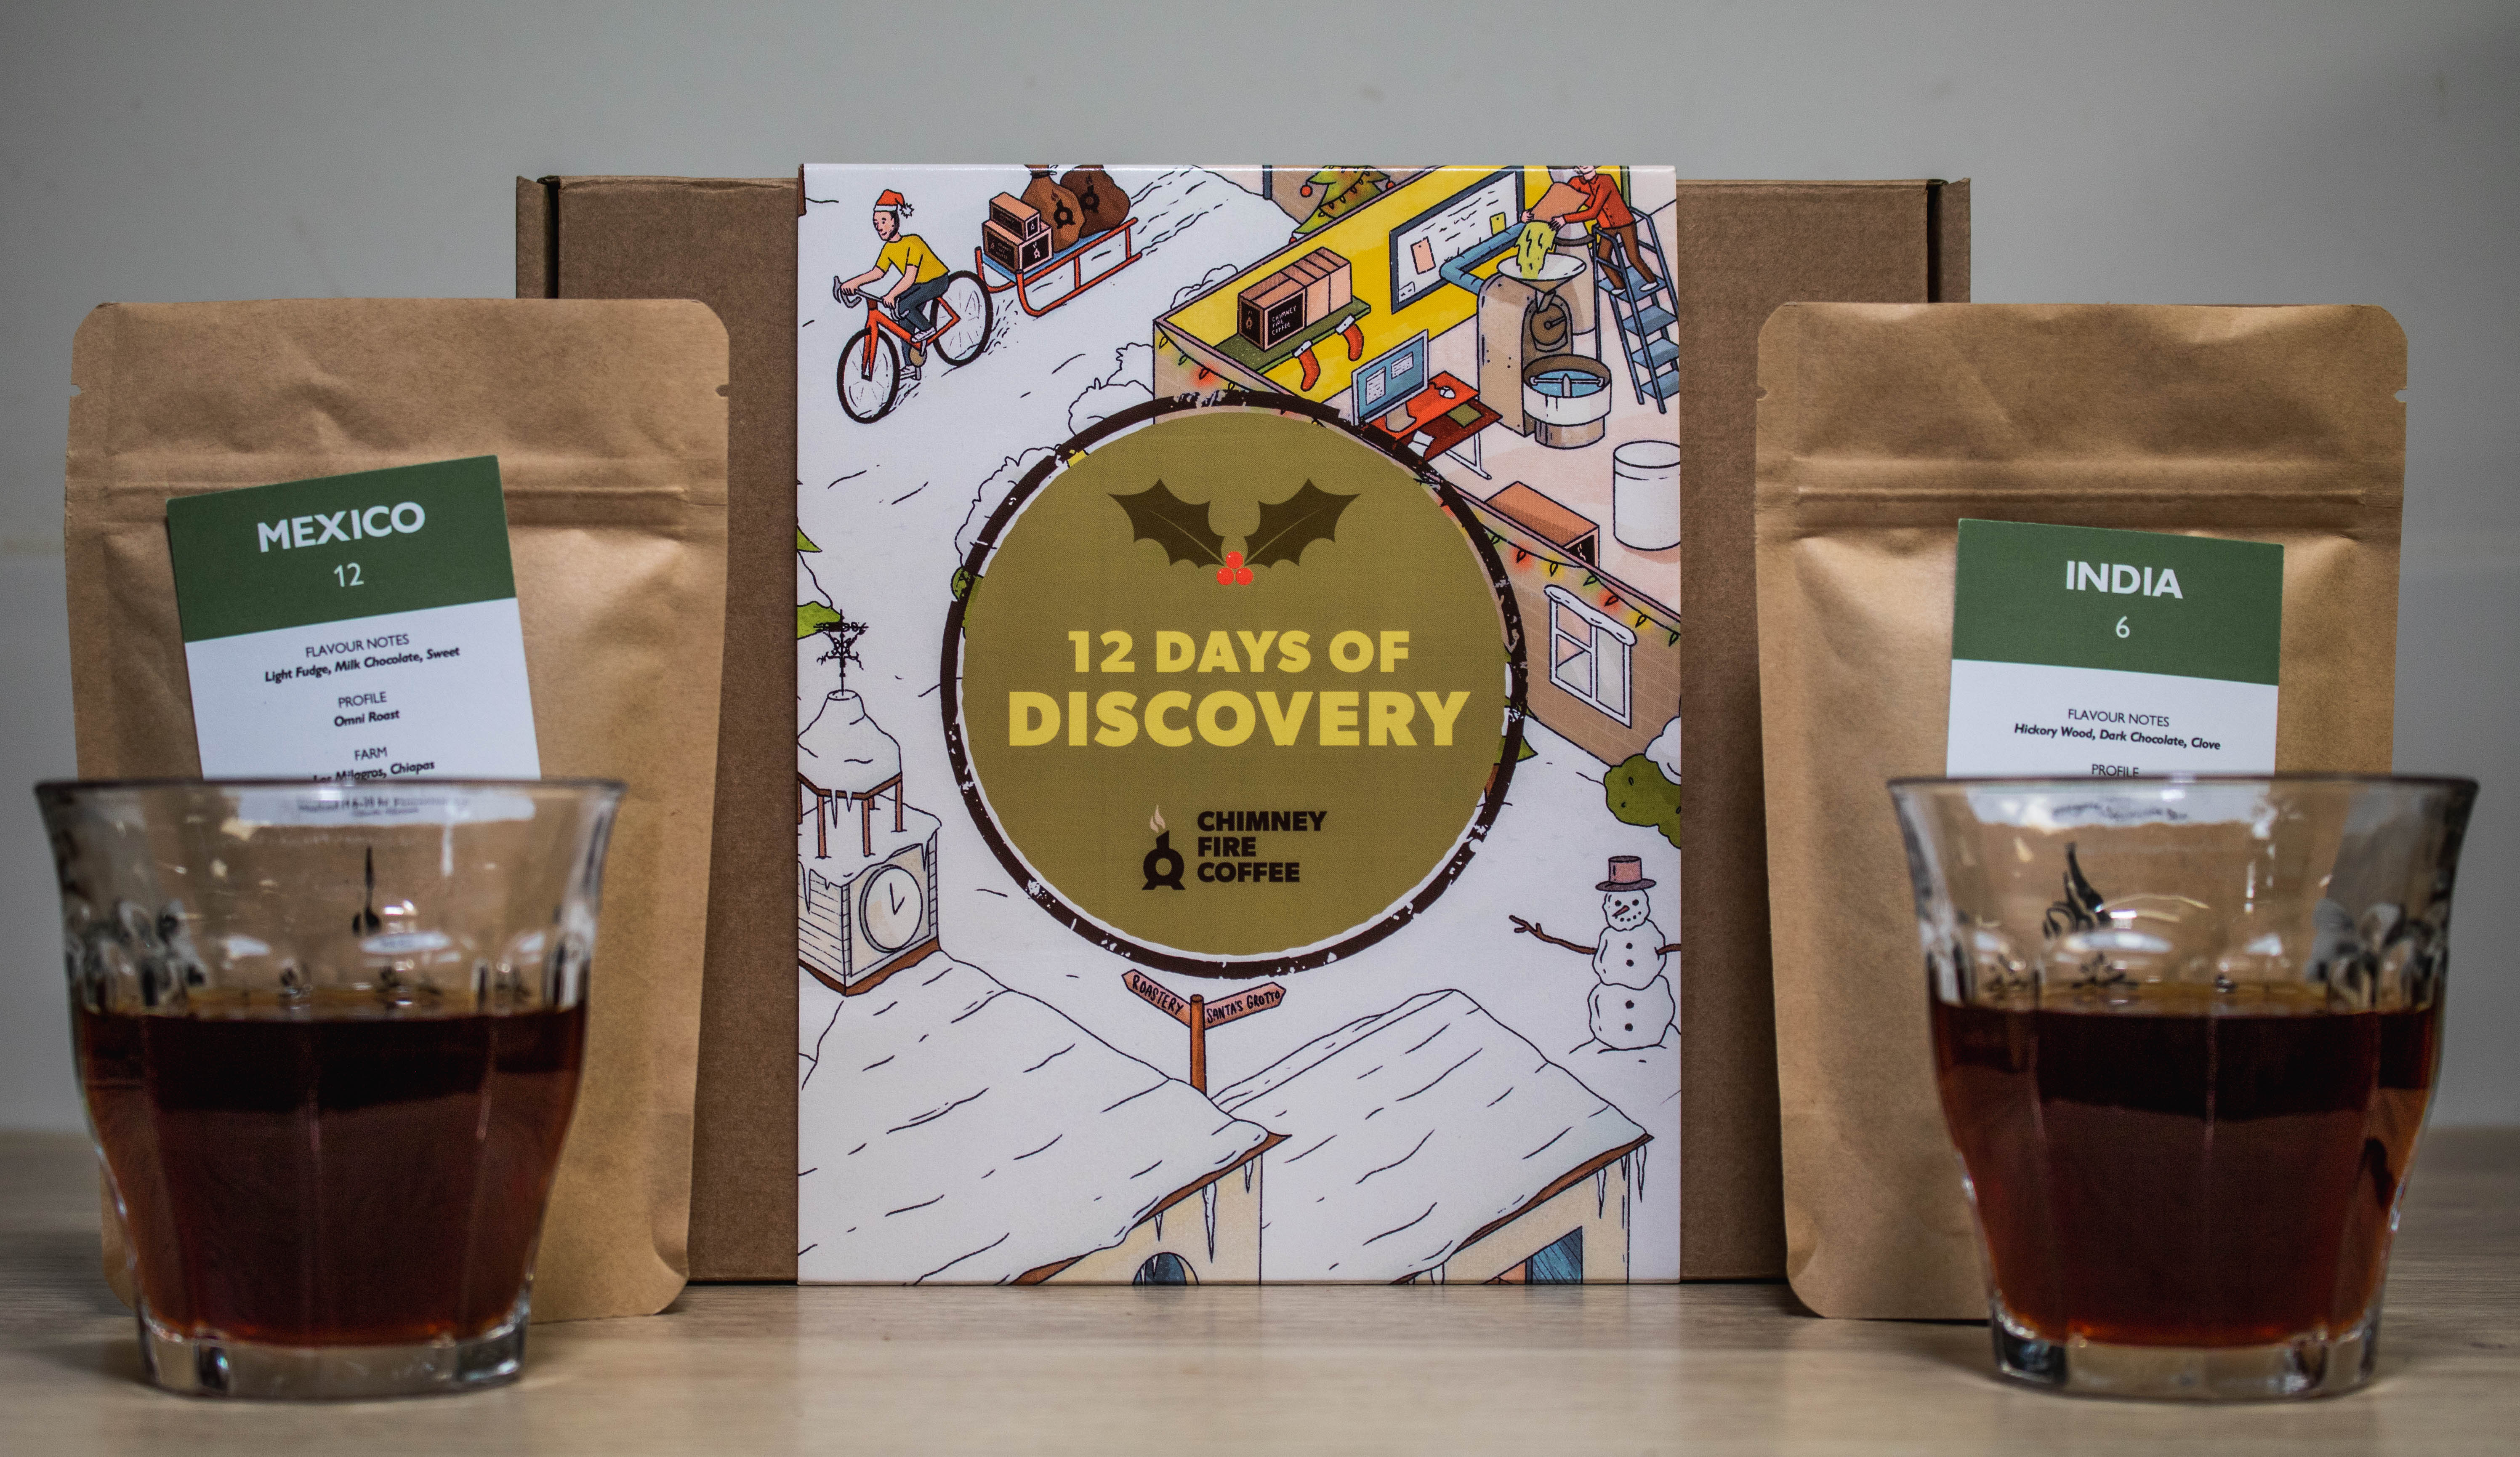 Chimney Fire Coffee - 12 Days of Discovery event Calendar